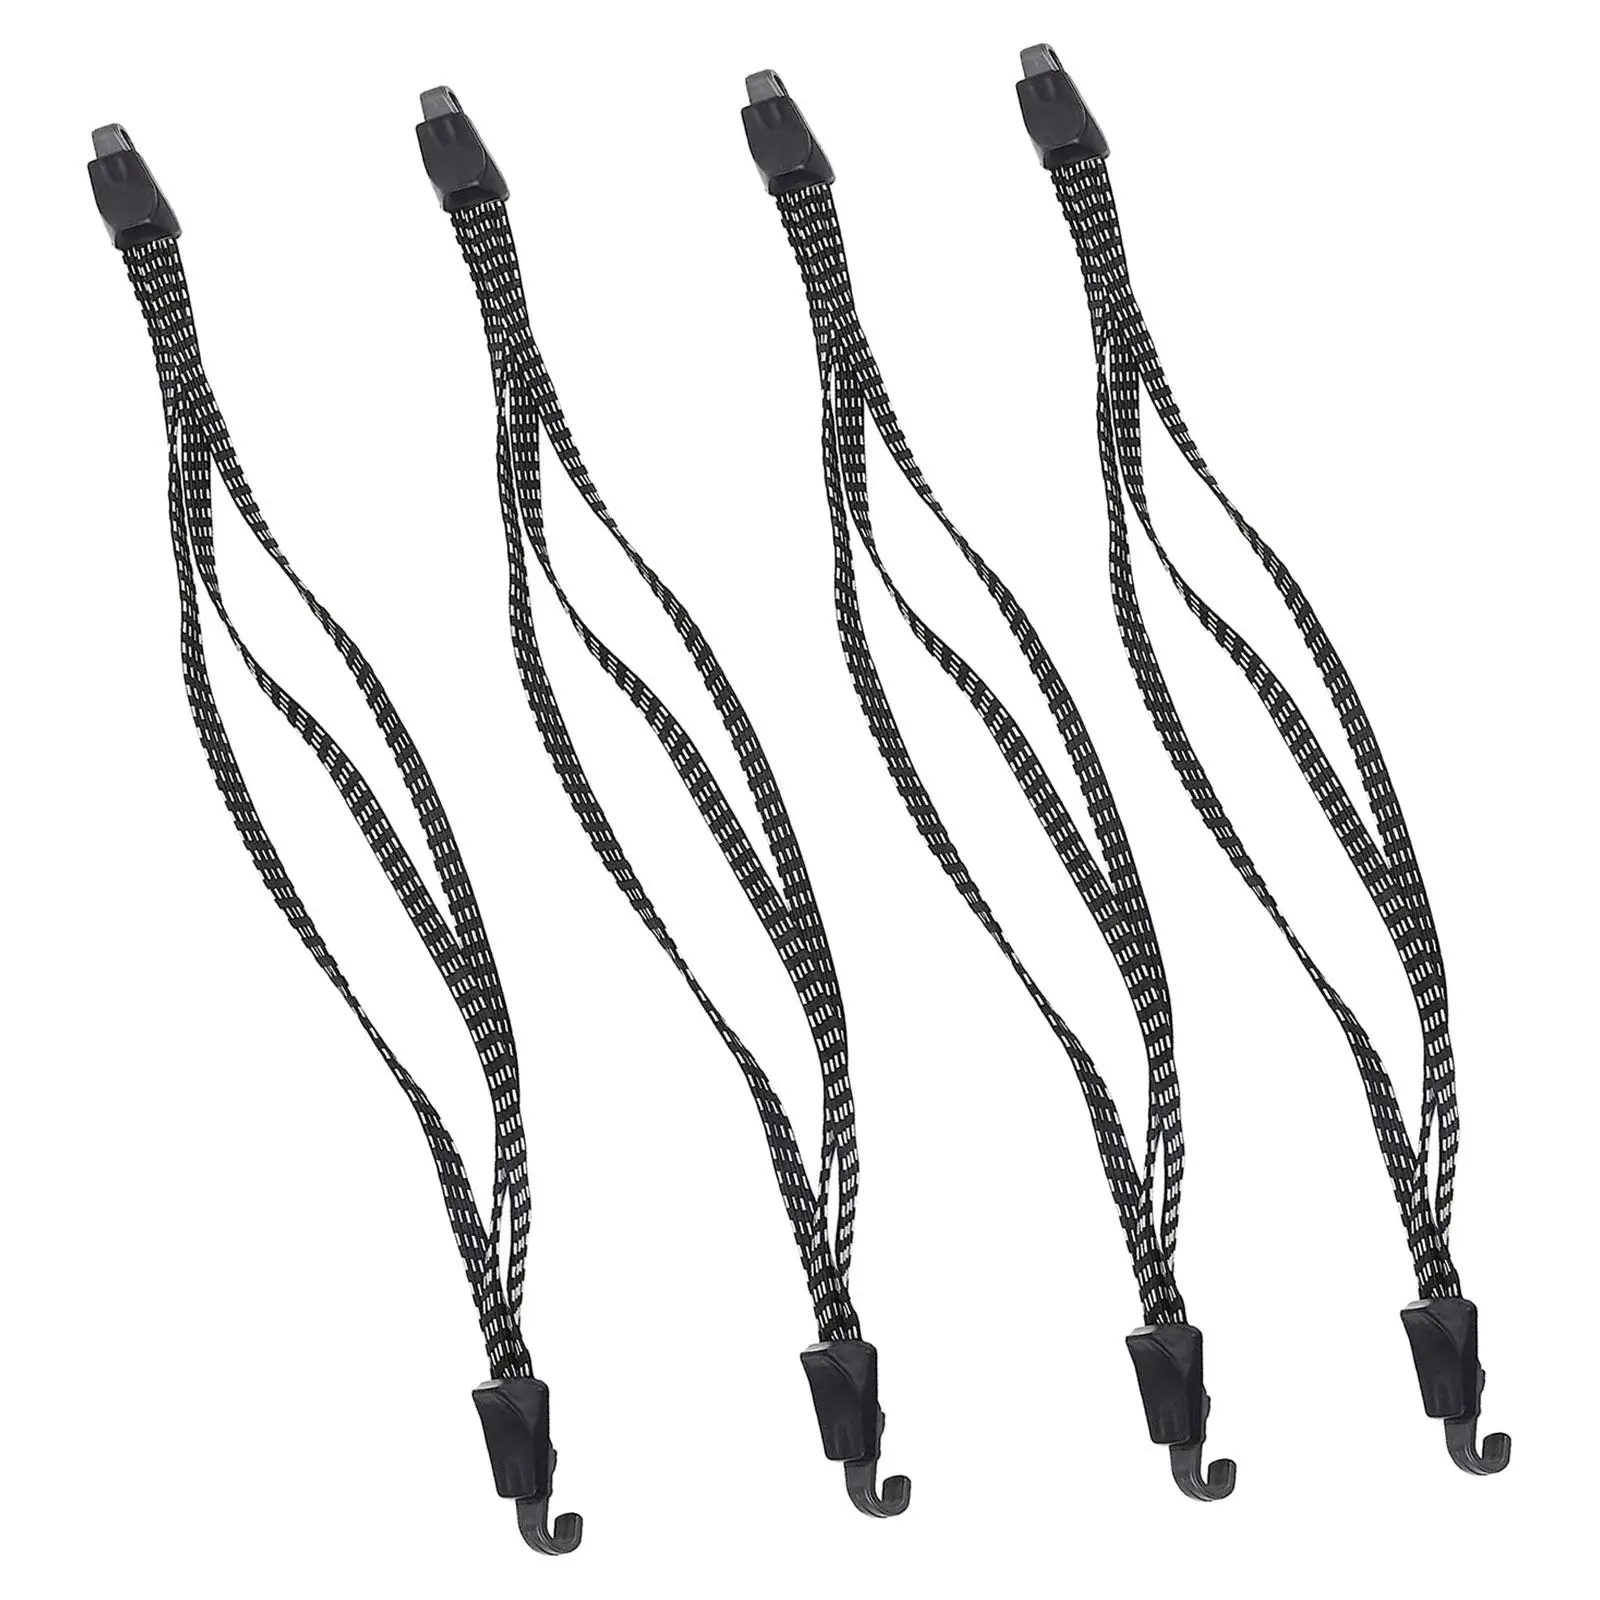 4x Bike Luggage Rope High Strength Luggage Belt Universal Motorcycle Luggage Rack Tie Down Straps for Bicycle Cargo RV Camping